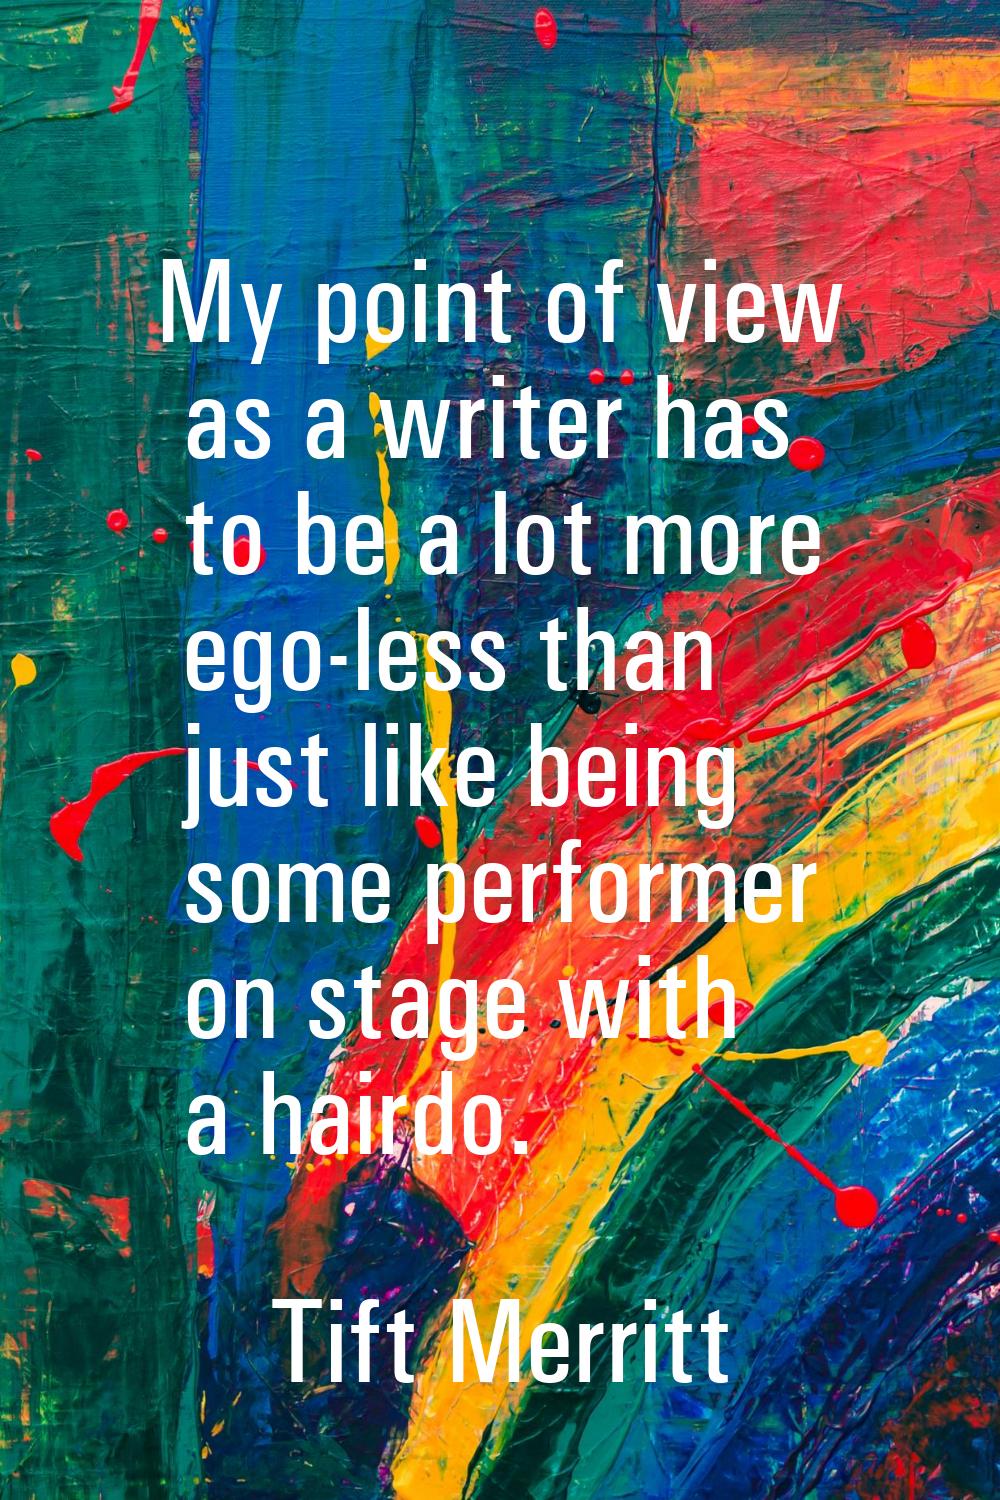 My point of view as a writer has to be a lot more ego-less than just like being some performer on s